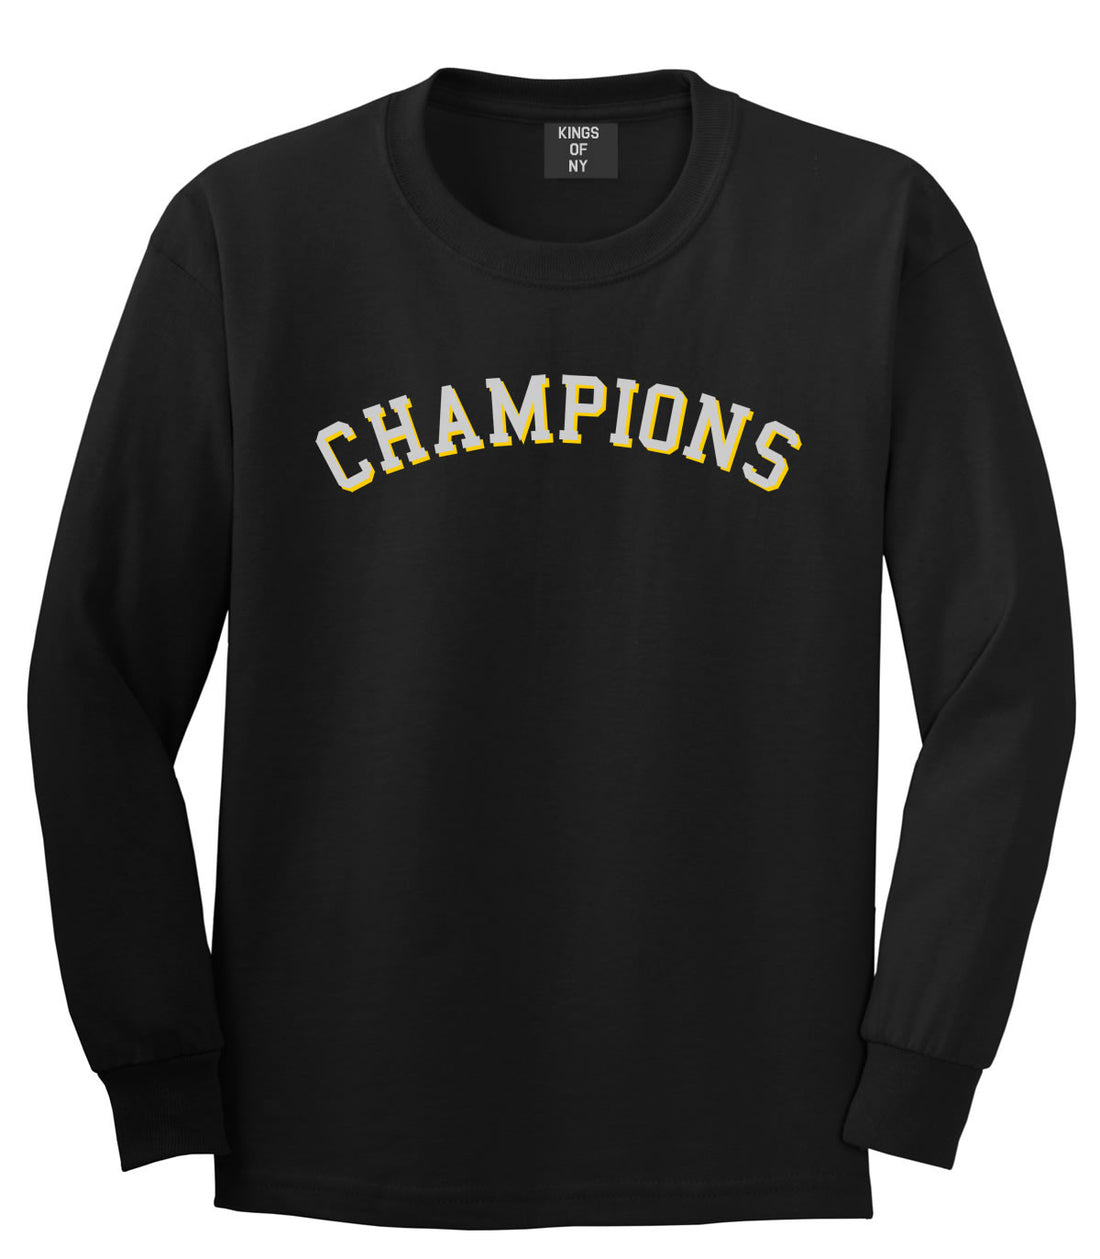 Champions Boys Kids Long Sleeve T-Shirt in Black by Kings Of NY